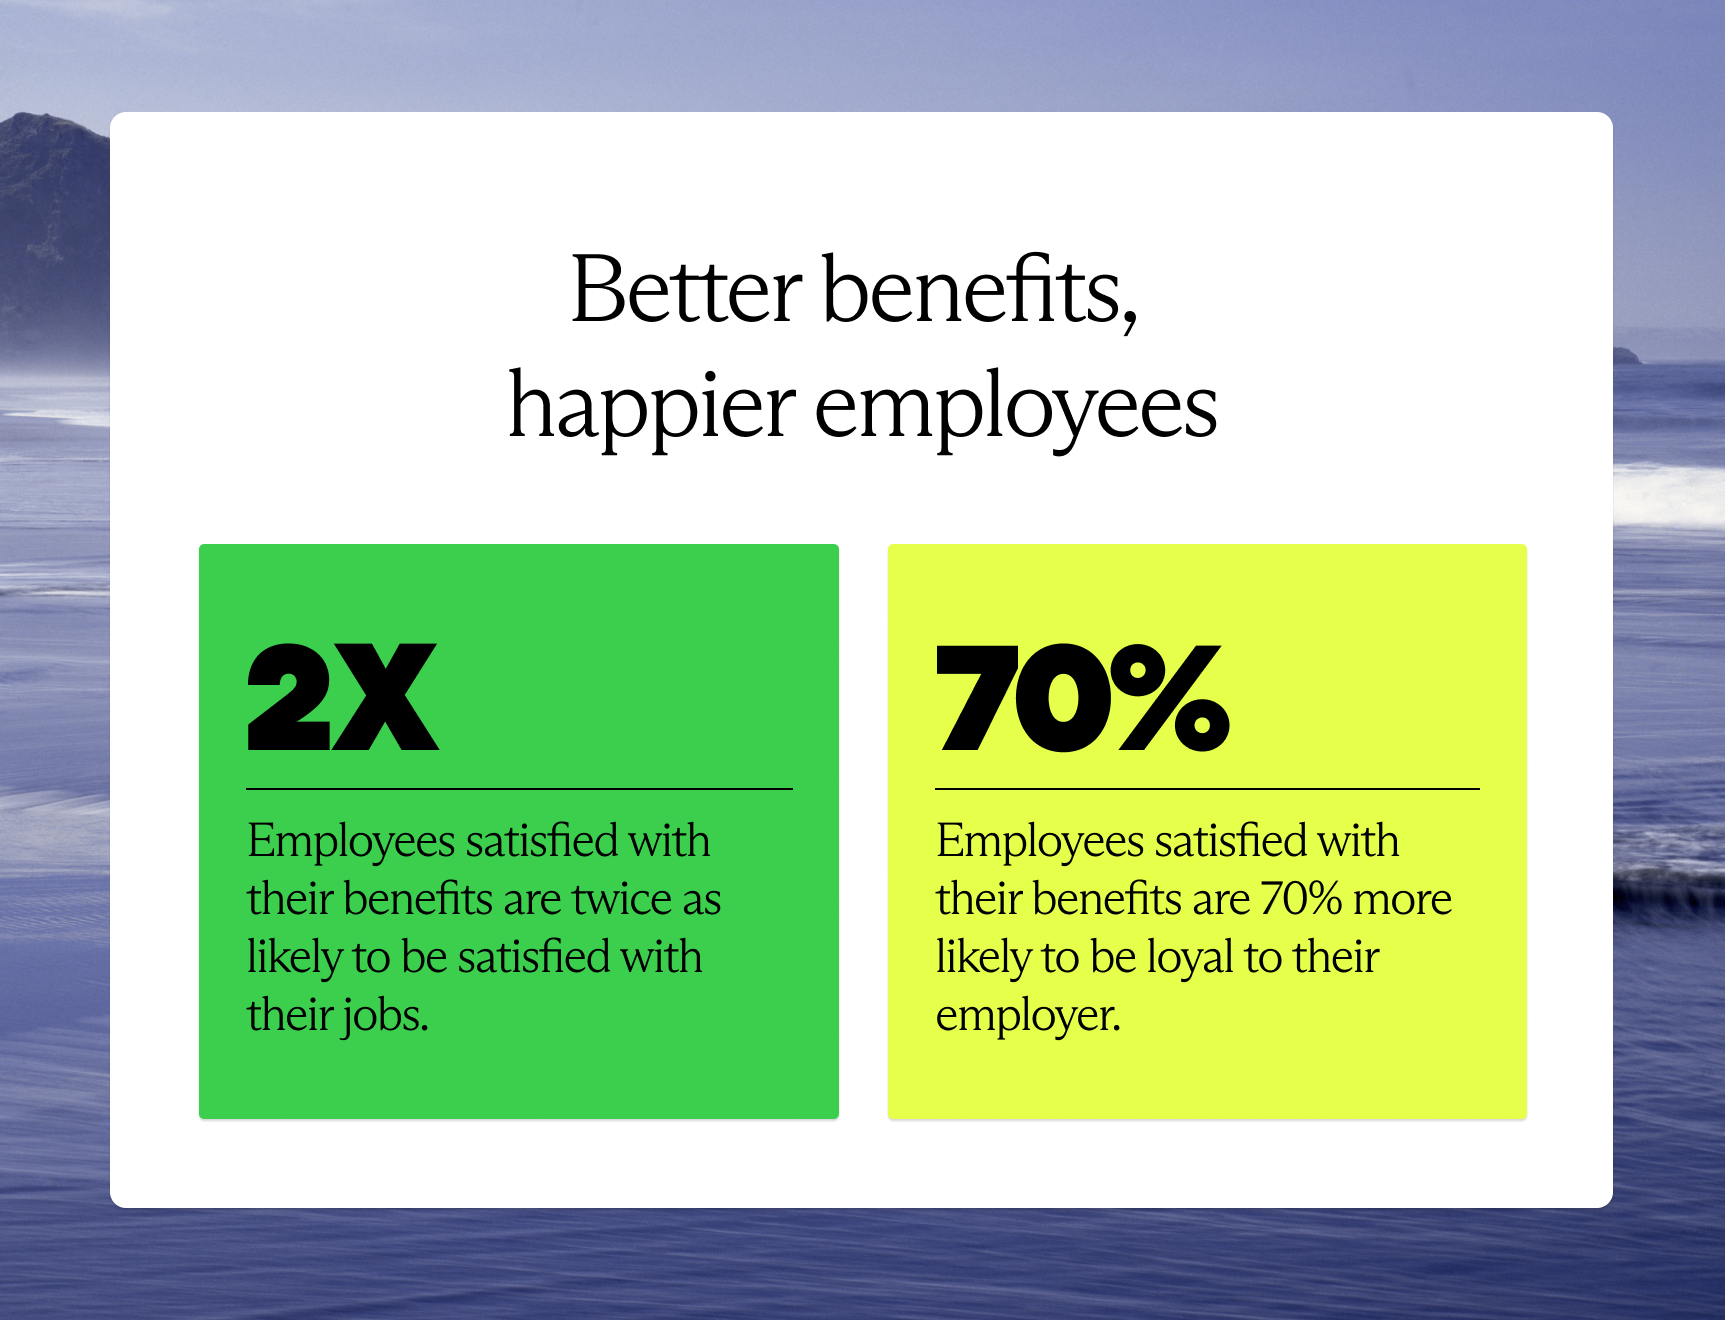 Employees satisfied with their benefits are 2x as likely to enjoy their jobs and 70% more likely to be loyal to their employer